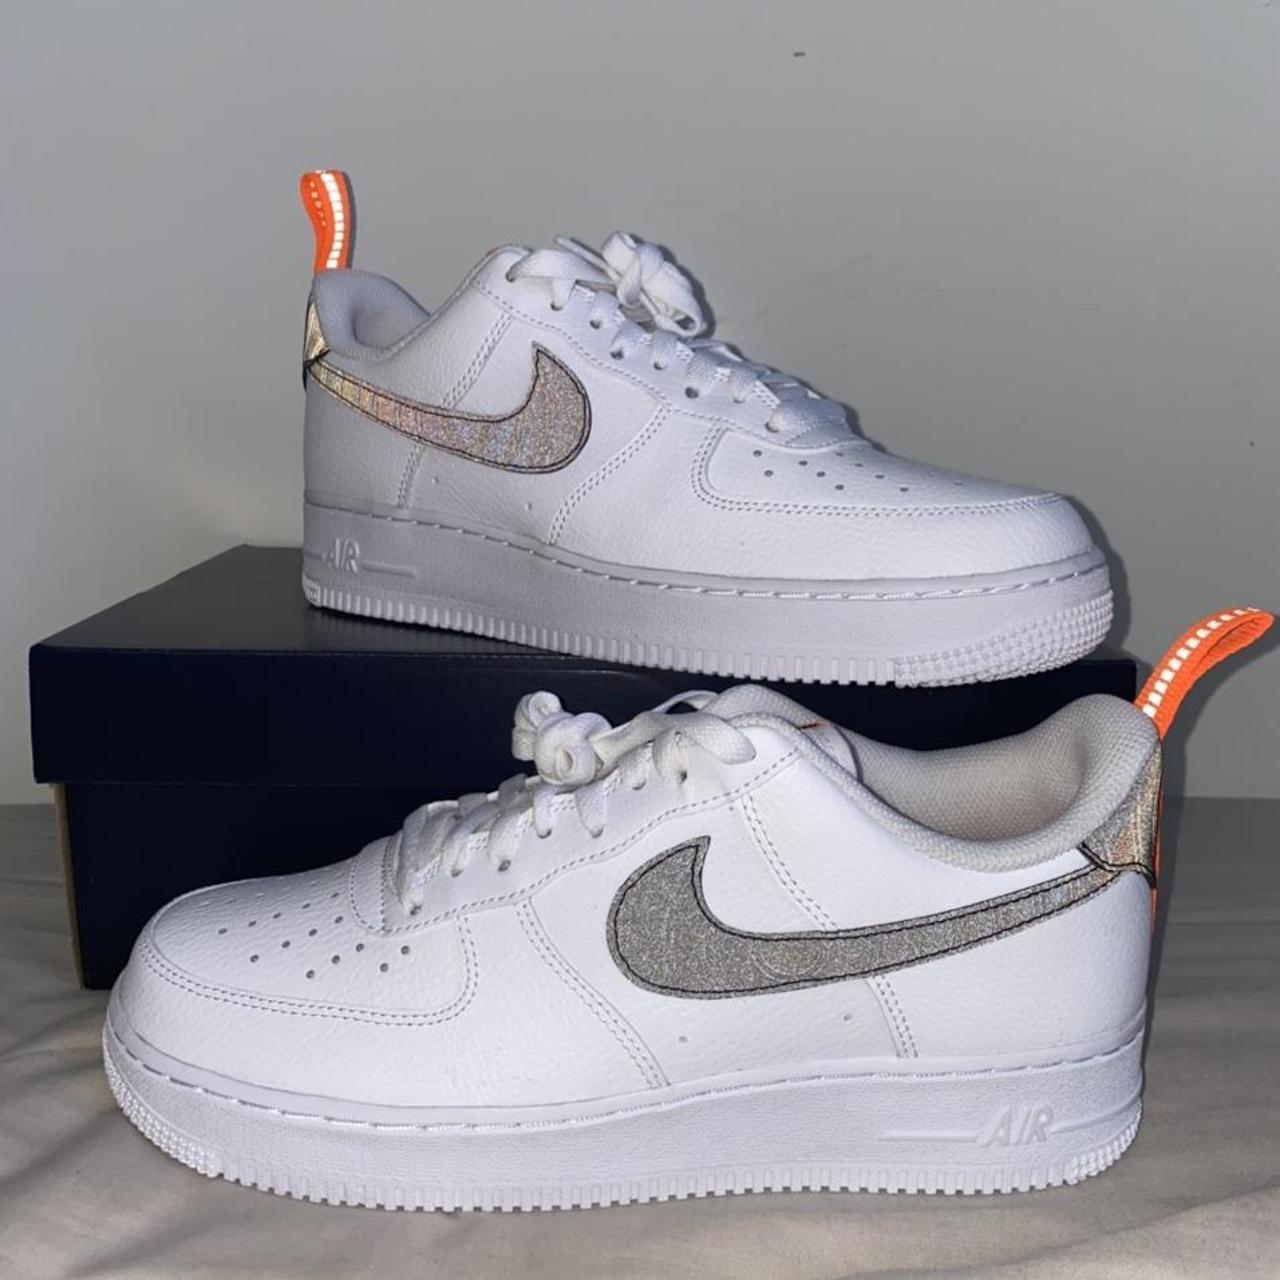 Nike Air Force 1 orange tick with reflective laces. - Depop